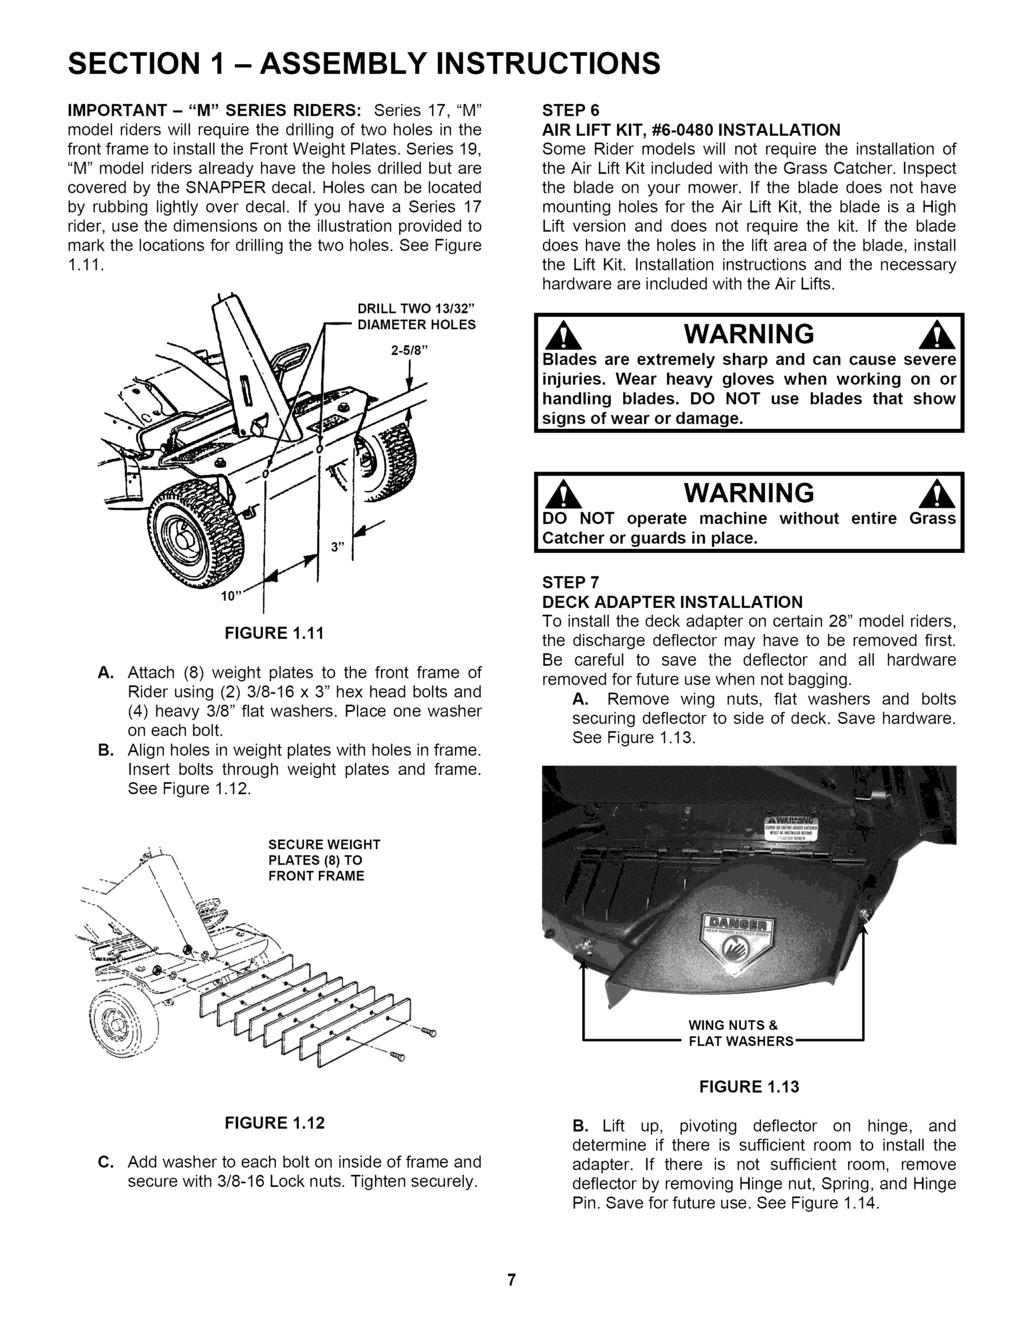 SECTION 1 - ASSEMBLY INSTRUCTIONS IMPORTANT- "M" SERIES RIDERS: Series 17, "M" model riders will require the drilling of two holes in the front frame to install the Front Weight Plates.